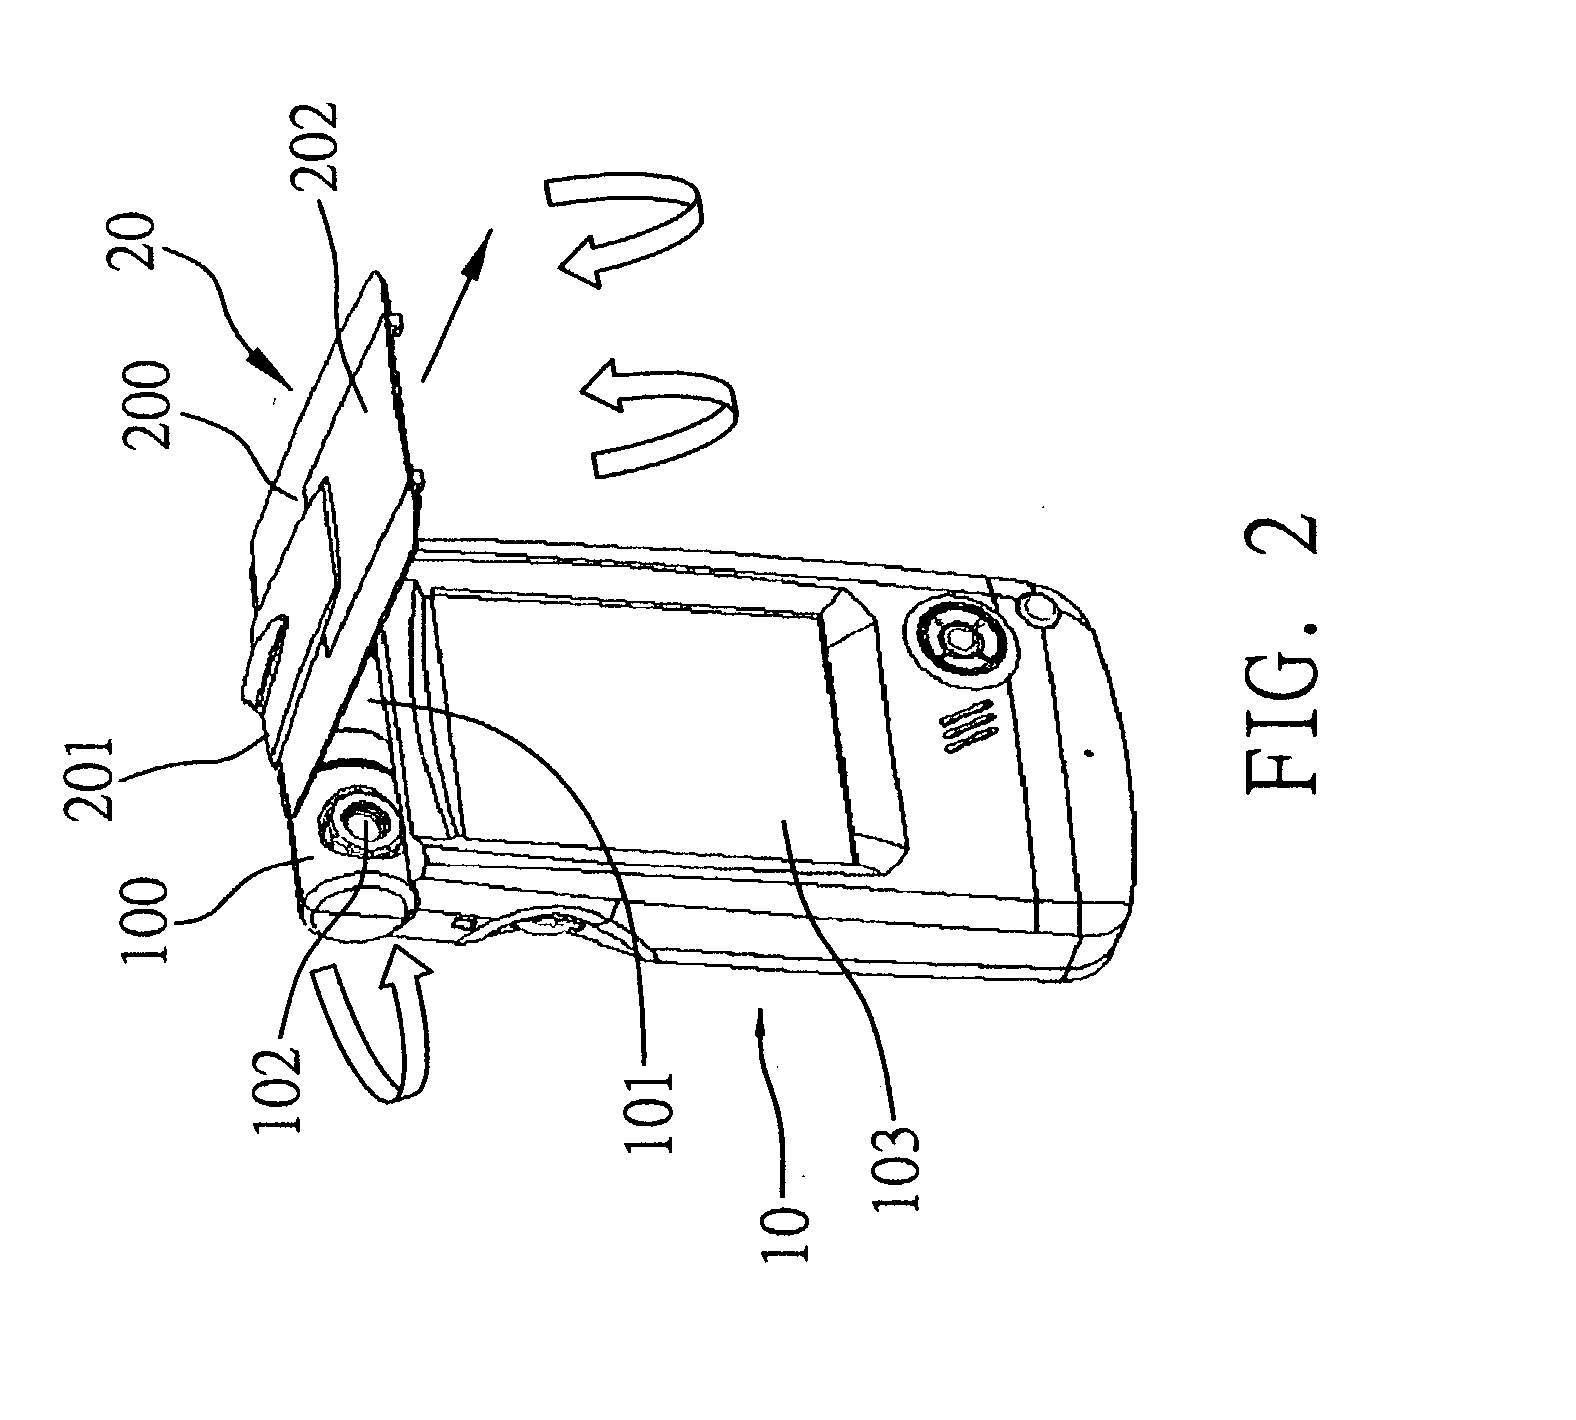 Image capture apparatus with a protection flip cover that clips leaf-like objects